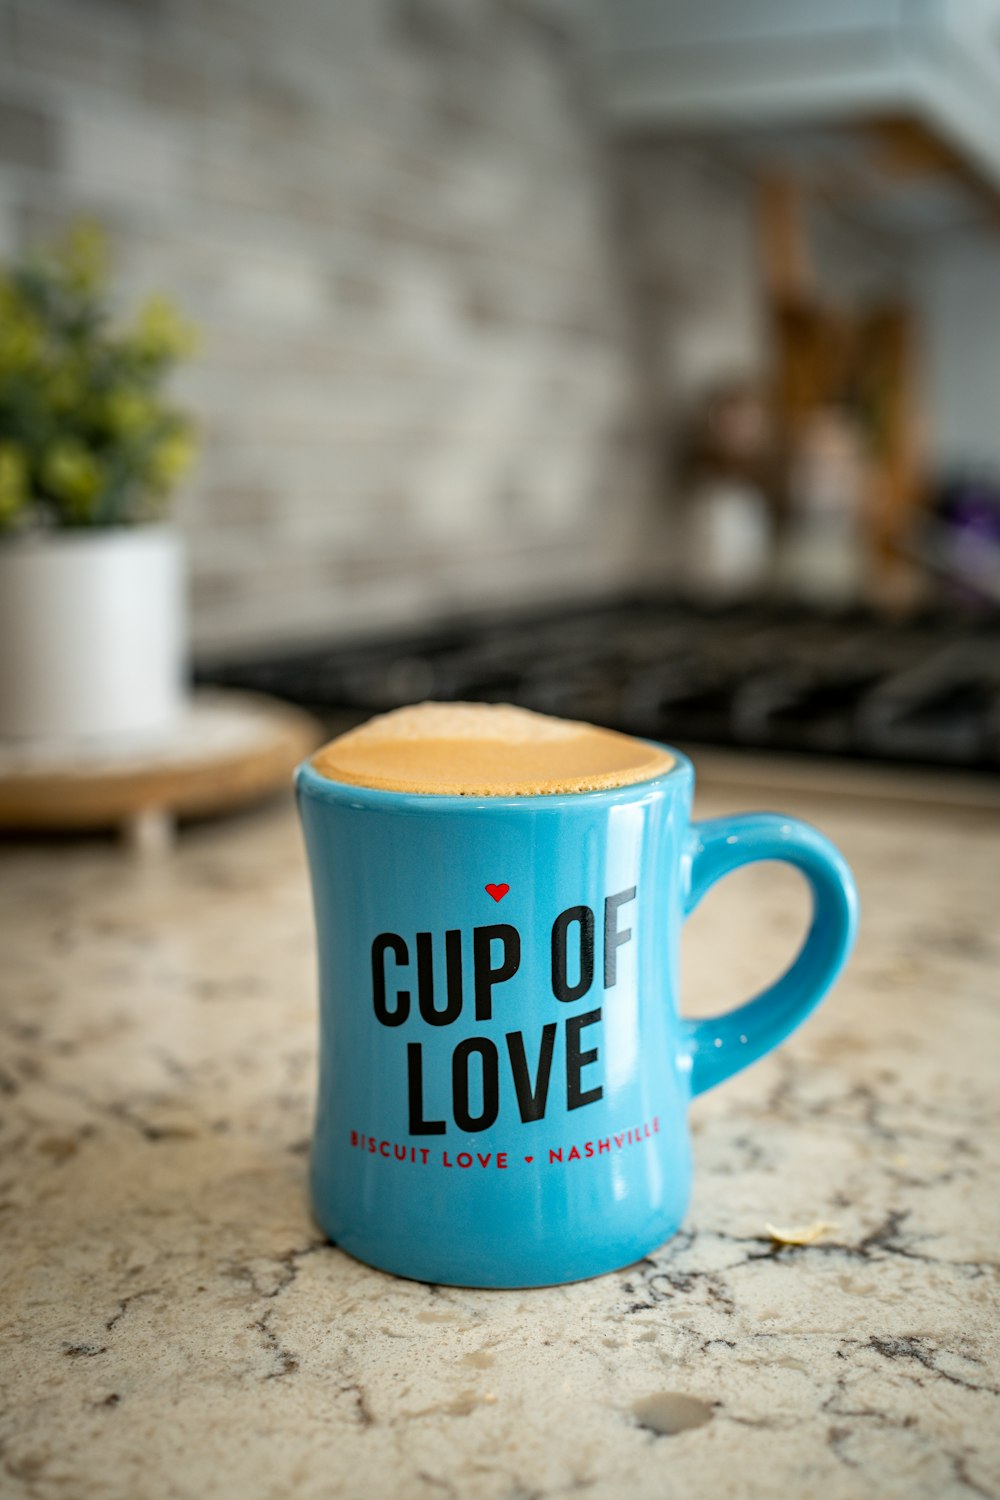 a cup of love mug sitting on a kitchen counter